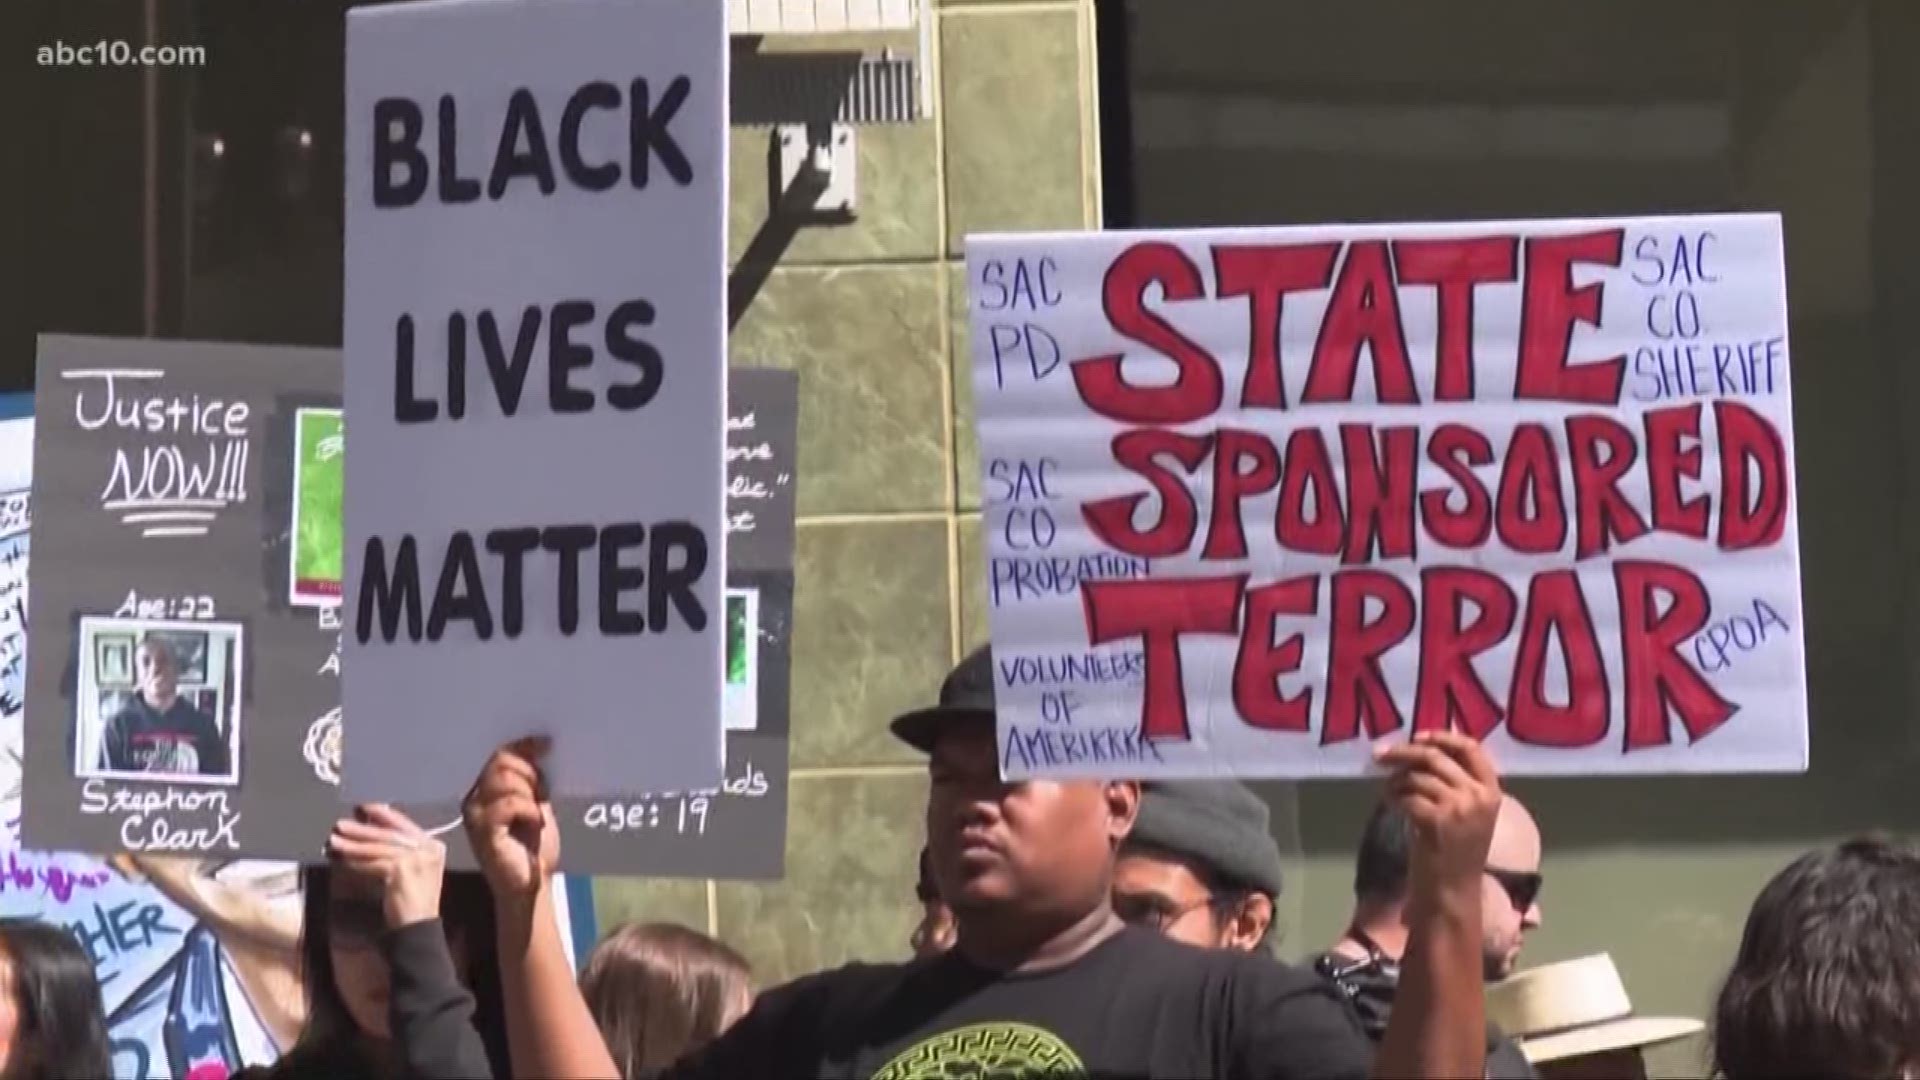 Following the Stephon Clark killing by Sacramento Police Officers, local officials and community leaders are advocating for bill to change police use of force policies. Here's what's trending.